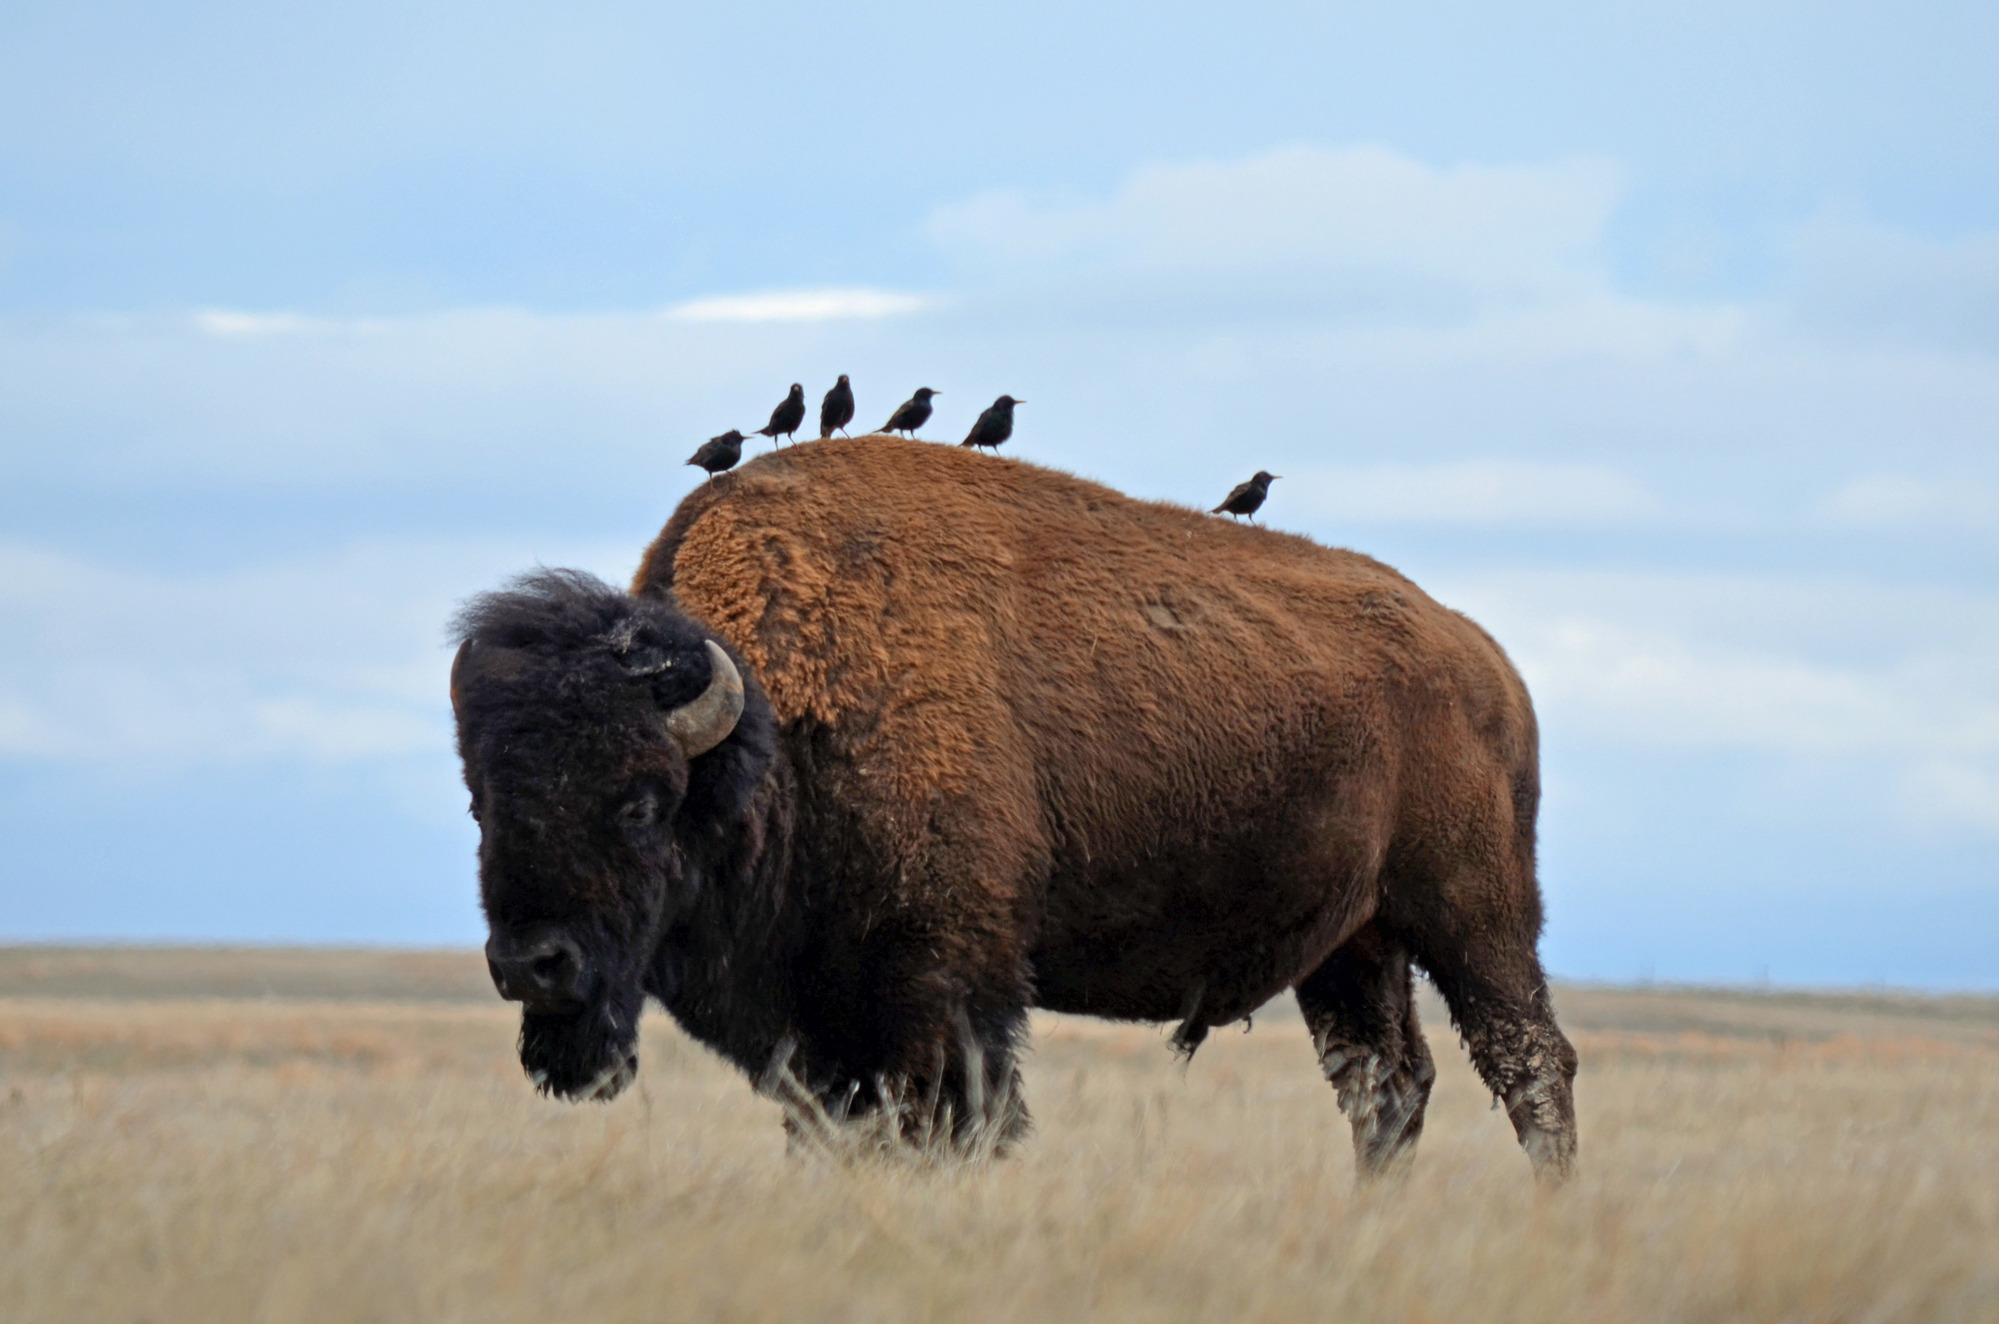 an adult male bison with six small black birds on its back